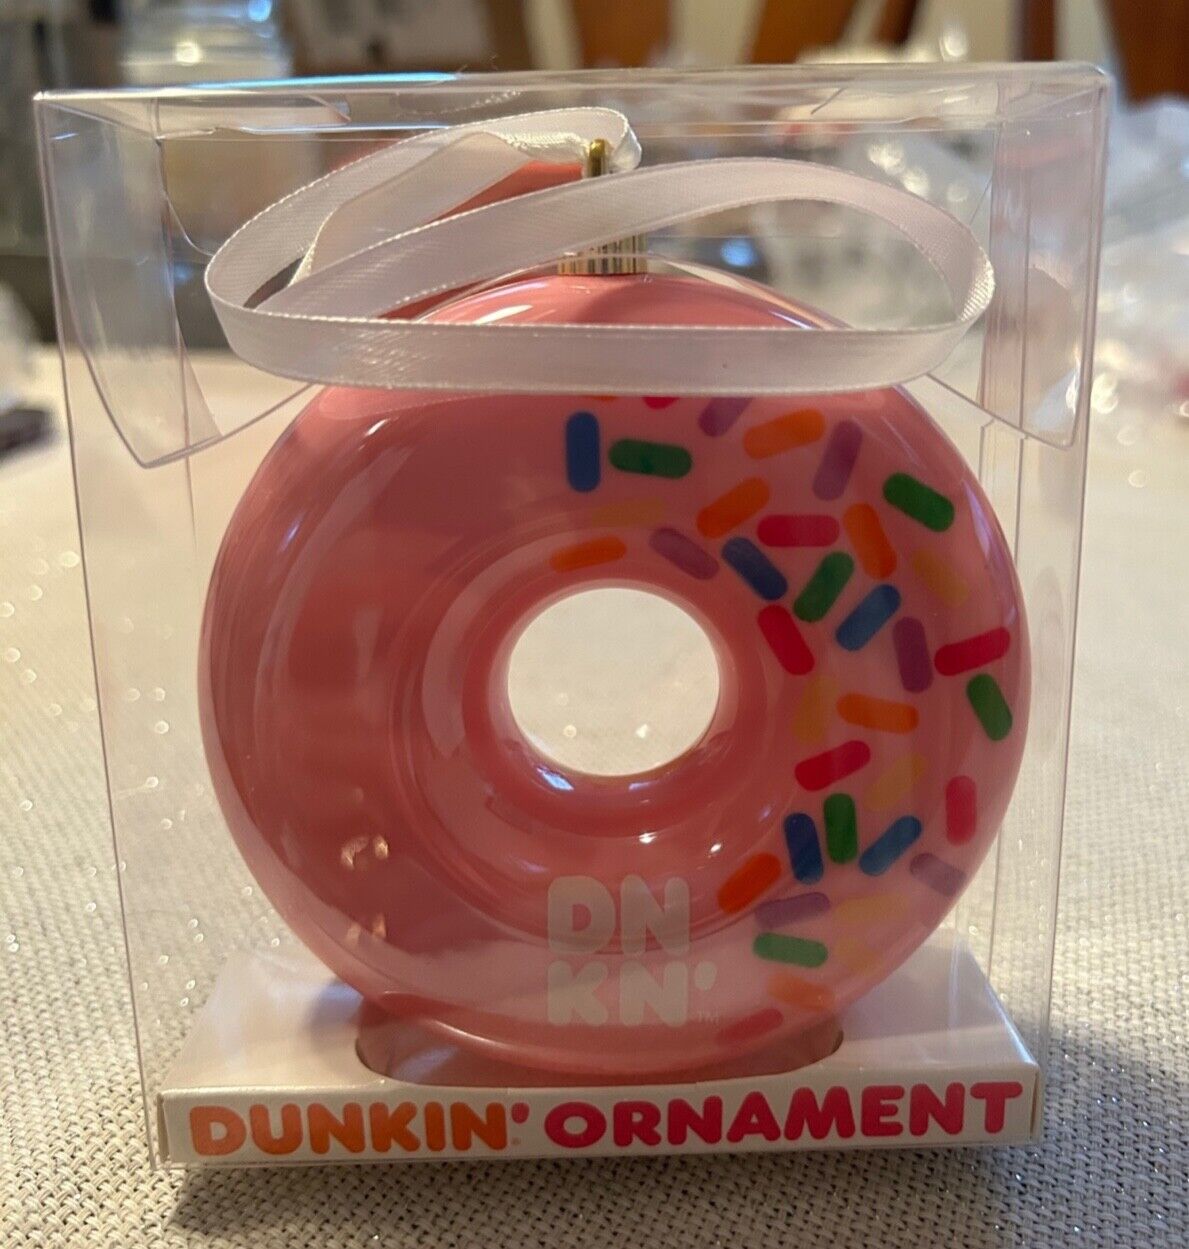 Dunkin Donuts Christmas Ornament 2019 - Pink Strawberry Frosted - New in Box